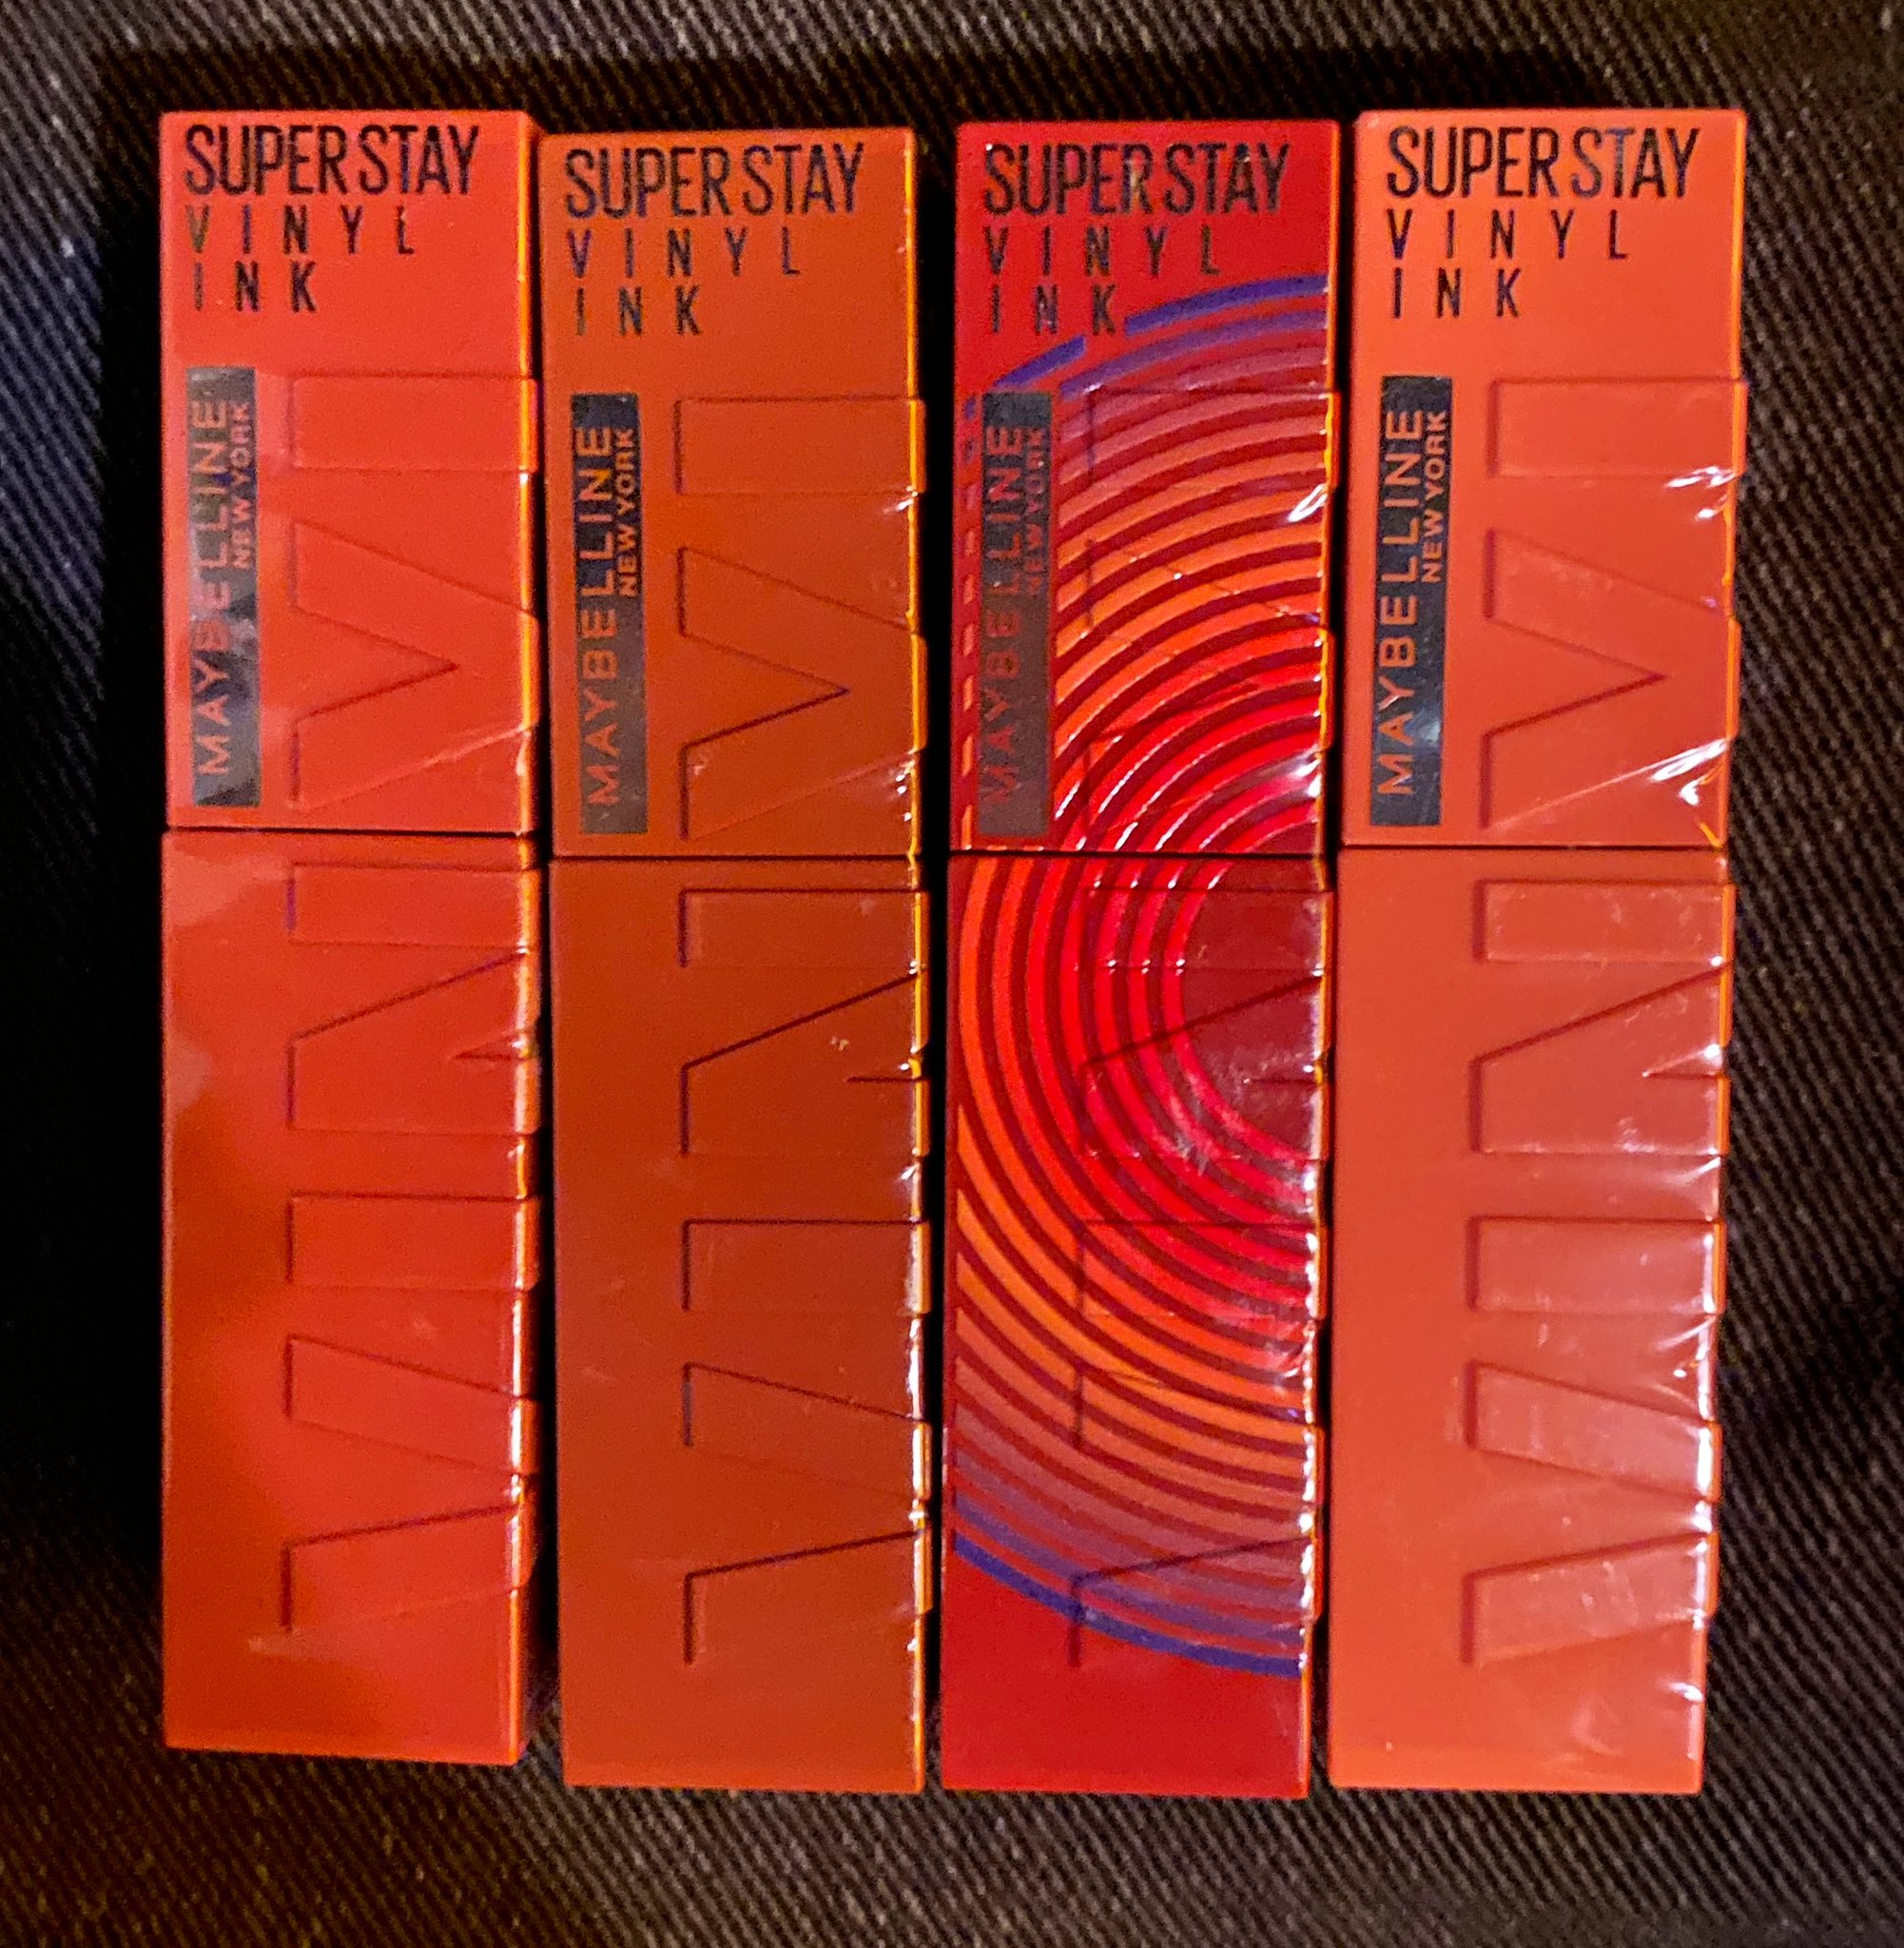 SWATCH] Maybelline Superstay Vinyl Ink!, Gallery posted by Nabel